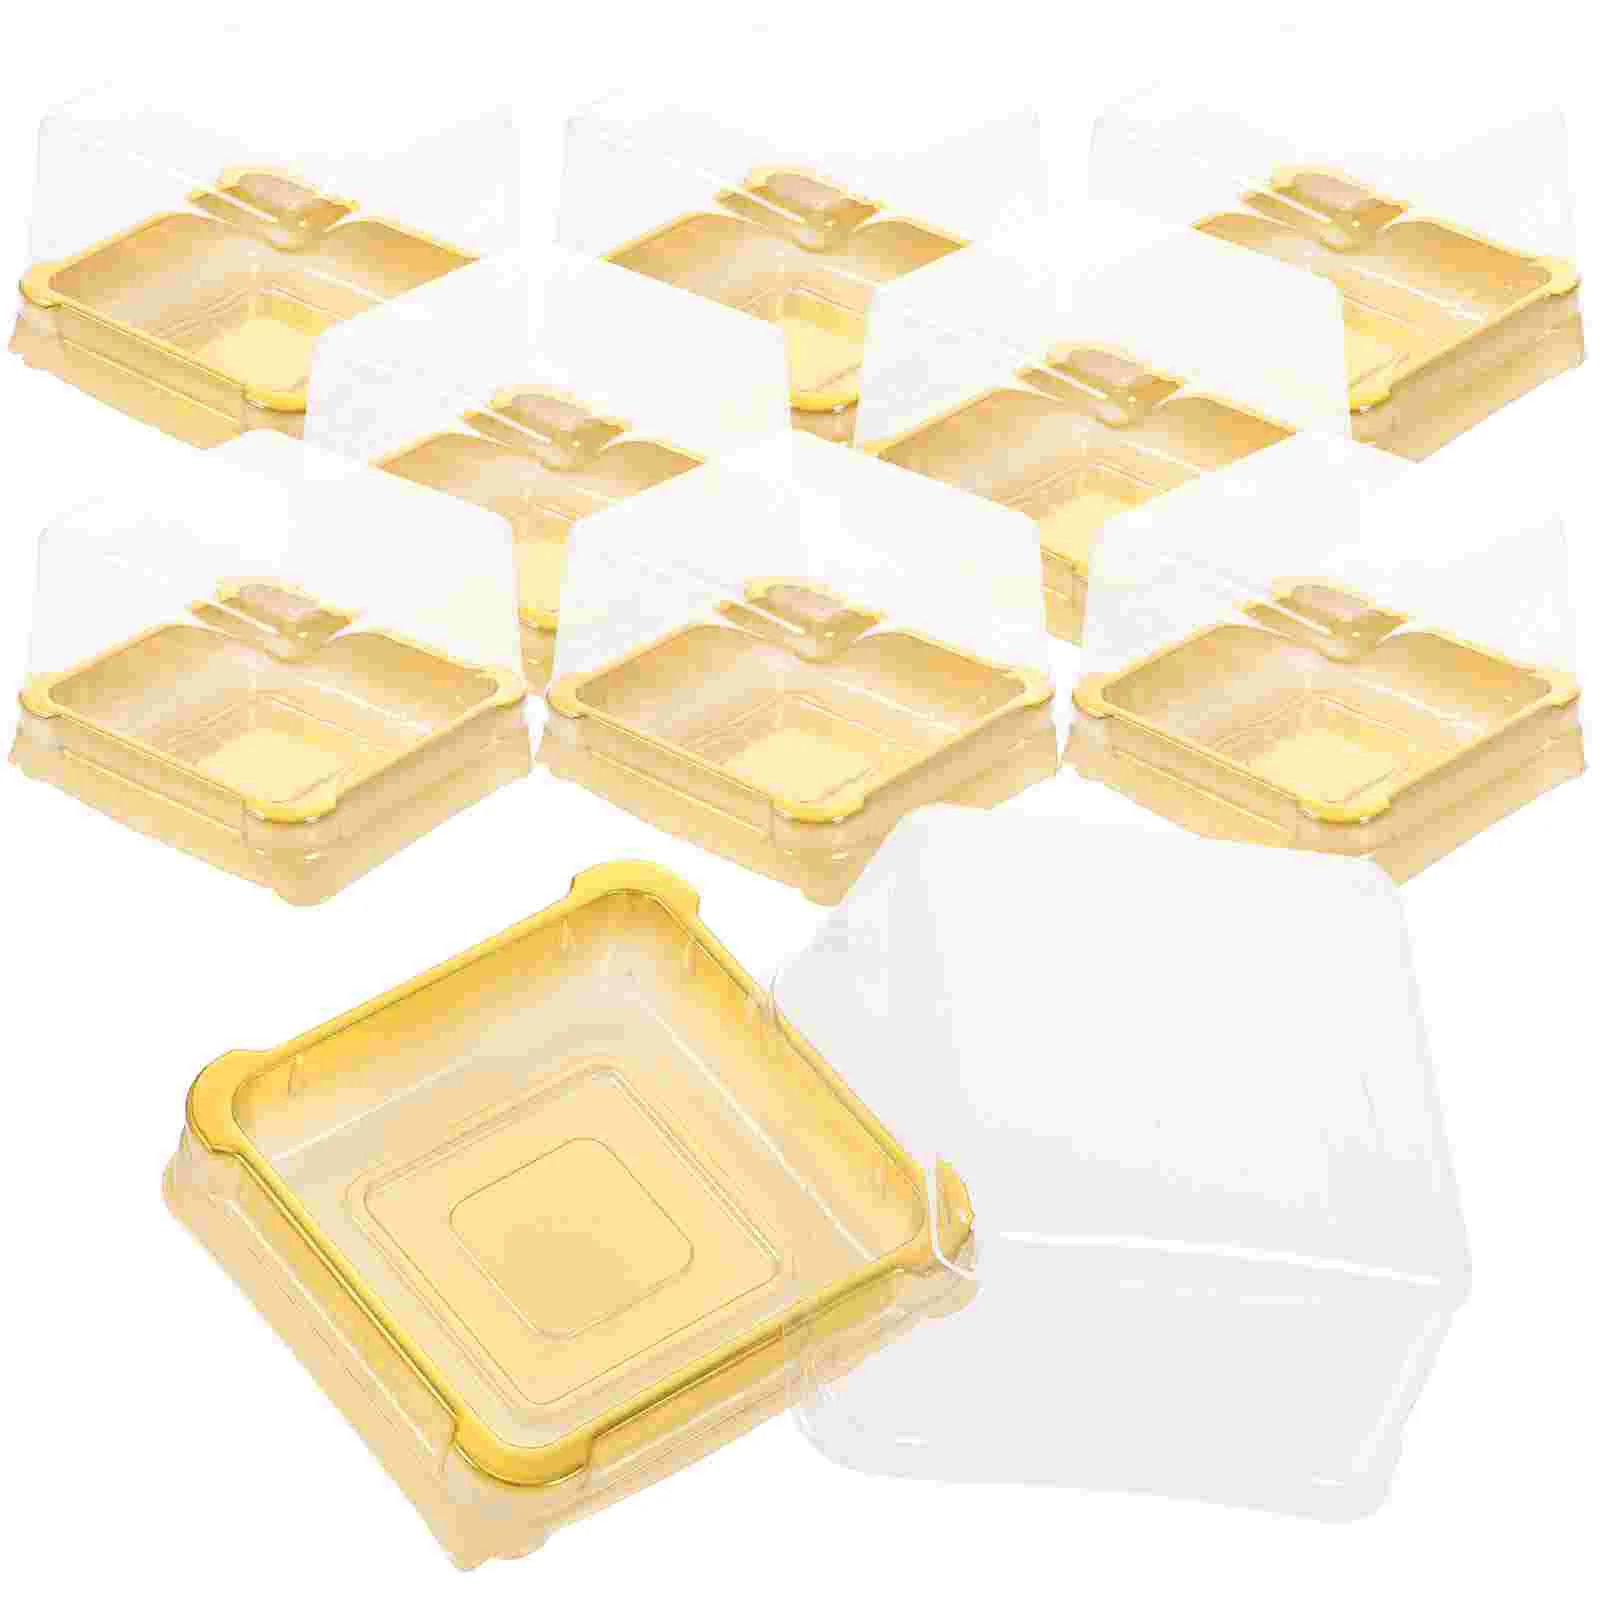 50pcs Clear Cupcake Boxes Mooncake Muffins Dome Box Containers Wedding Birthday Gifts Supplies